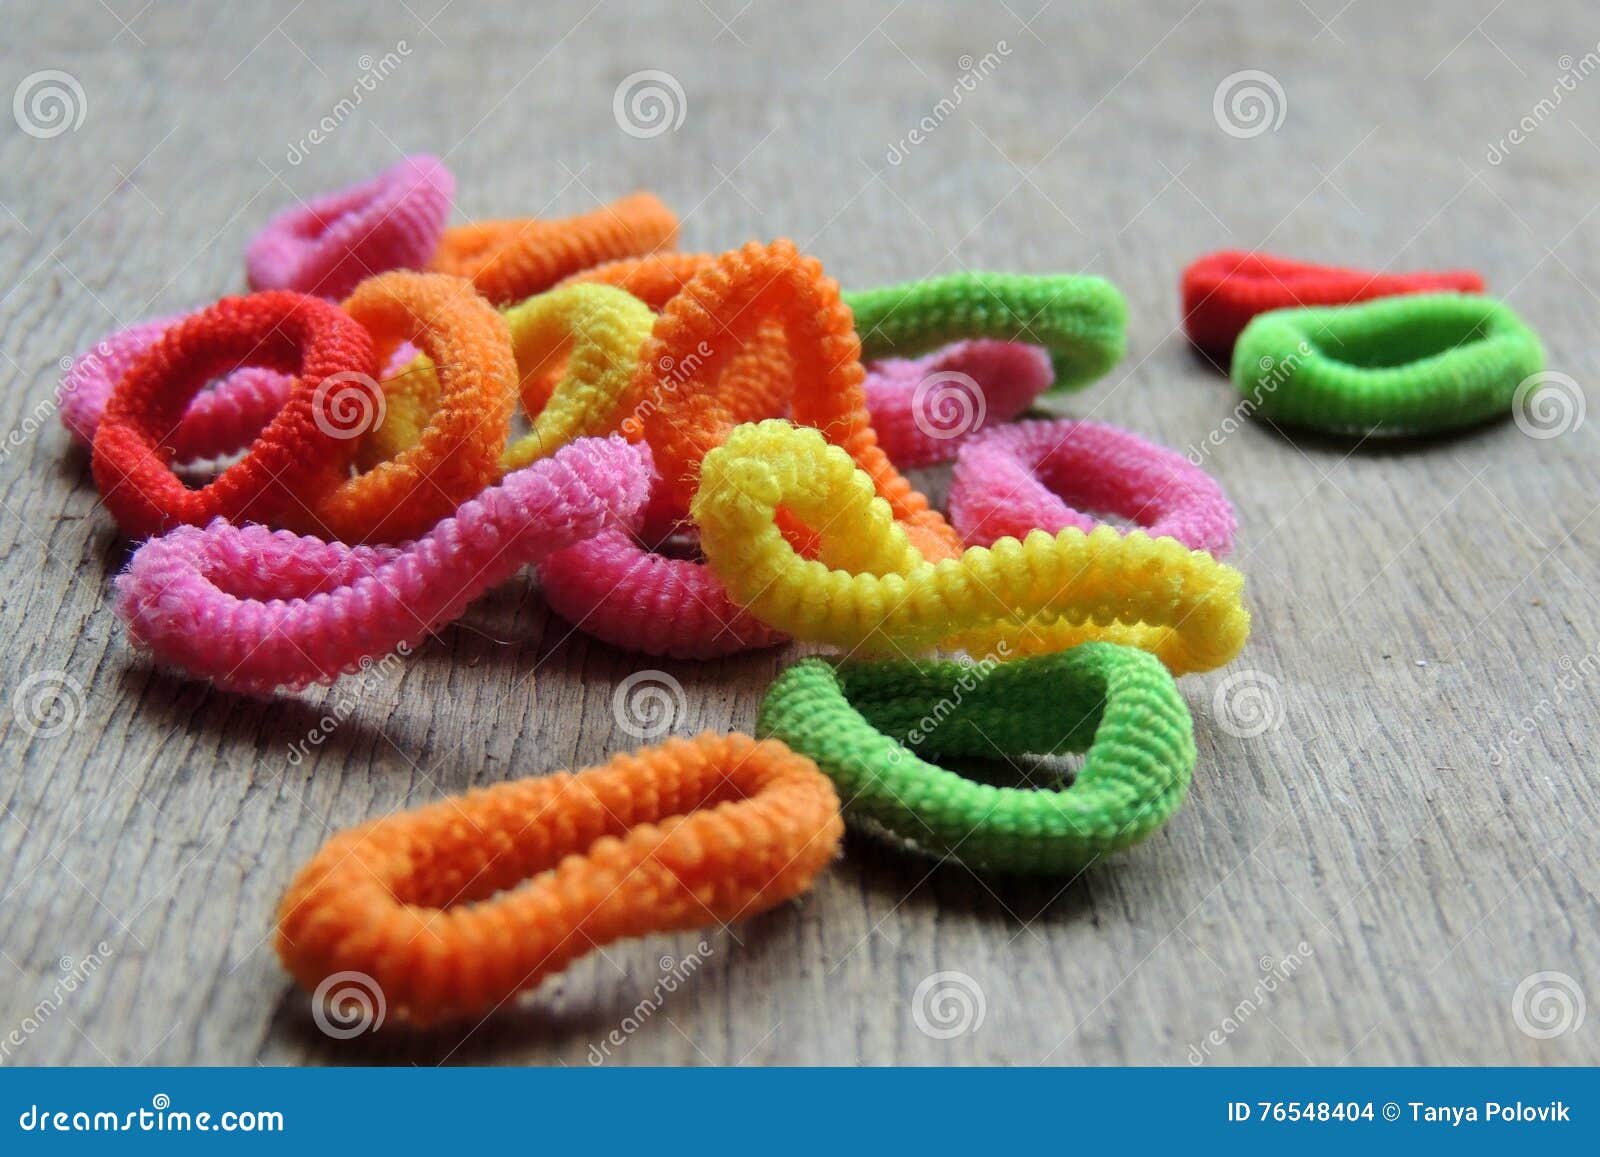 Colored Rubber Bands for Hair Braiding Stock Photo - Image of icon, braids:  76548404